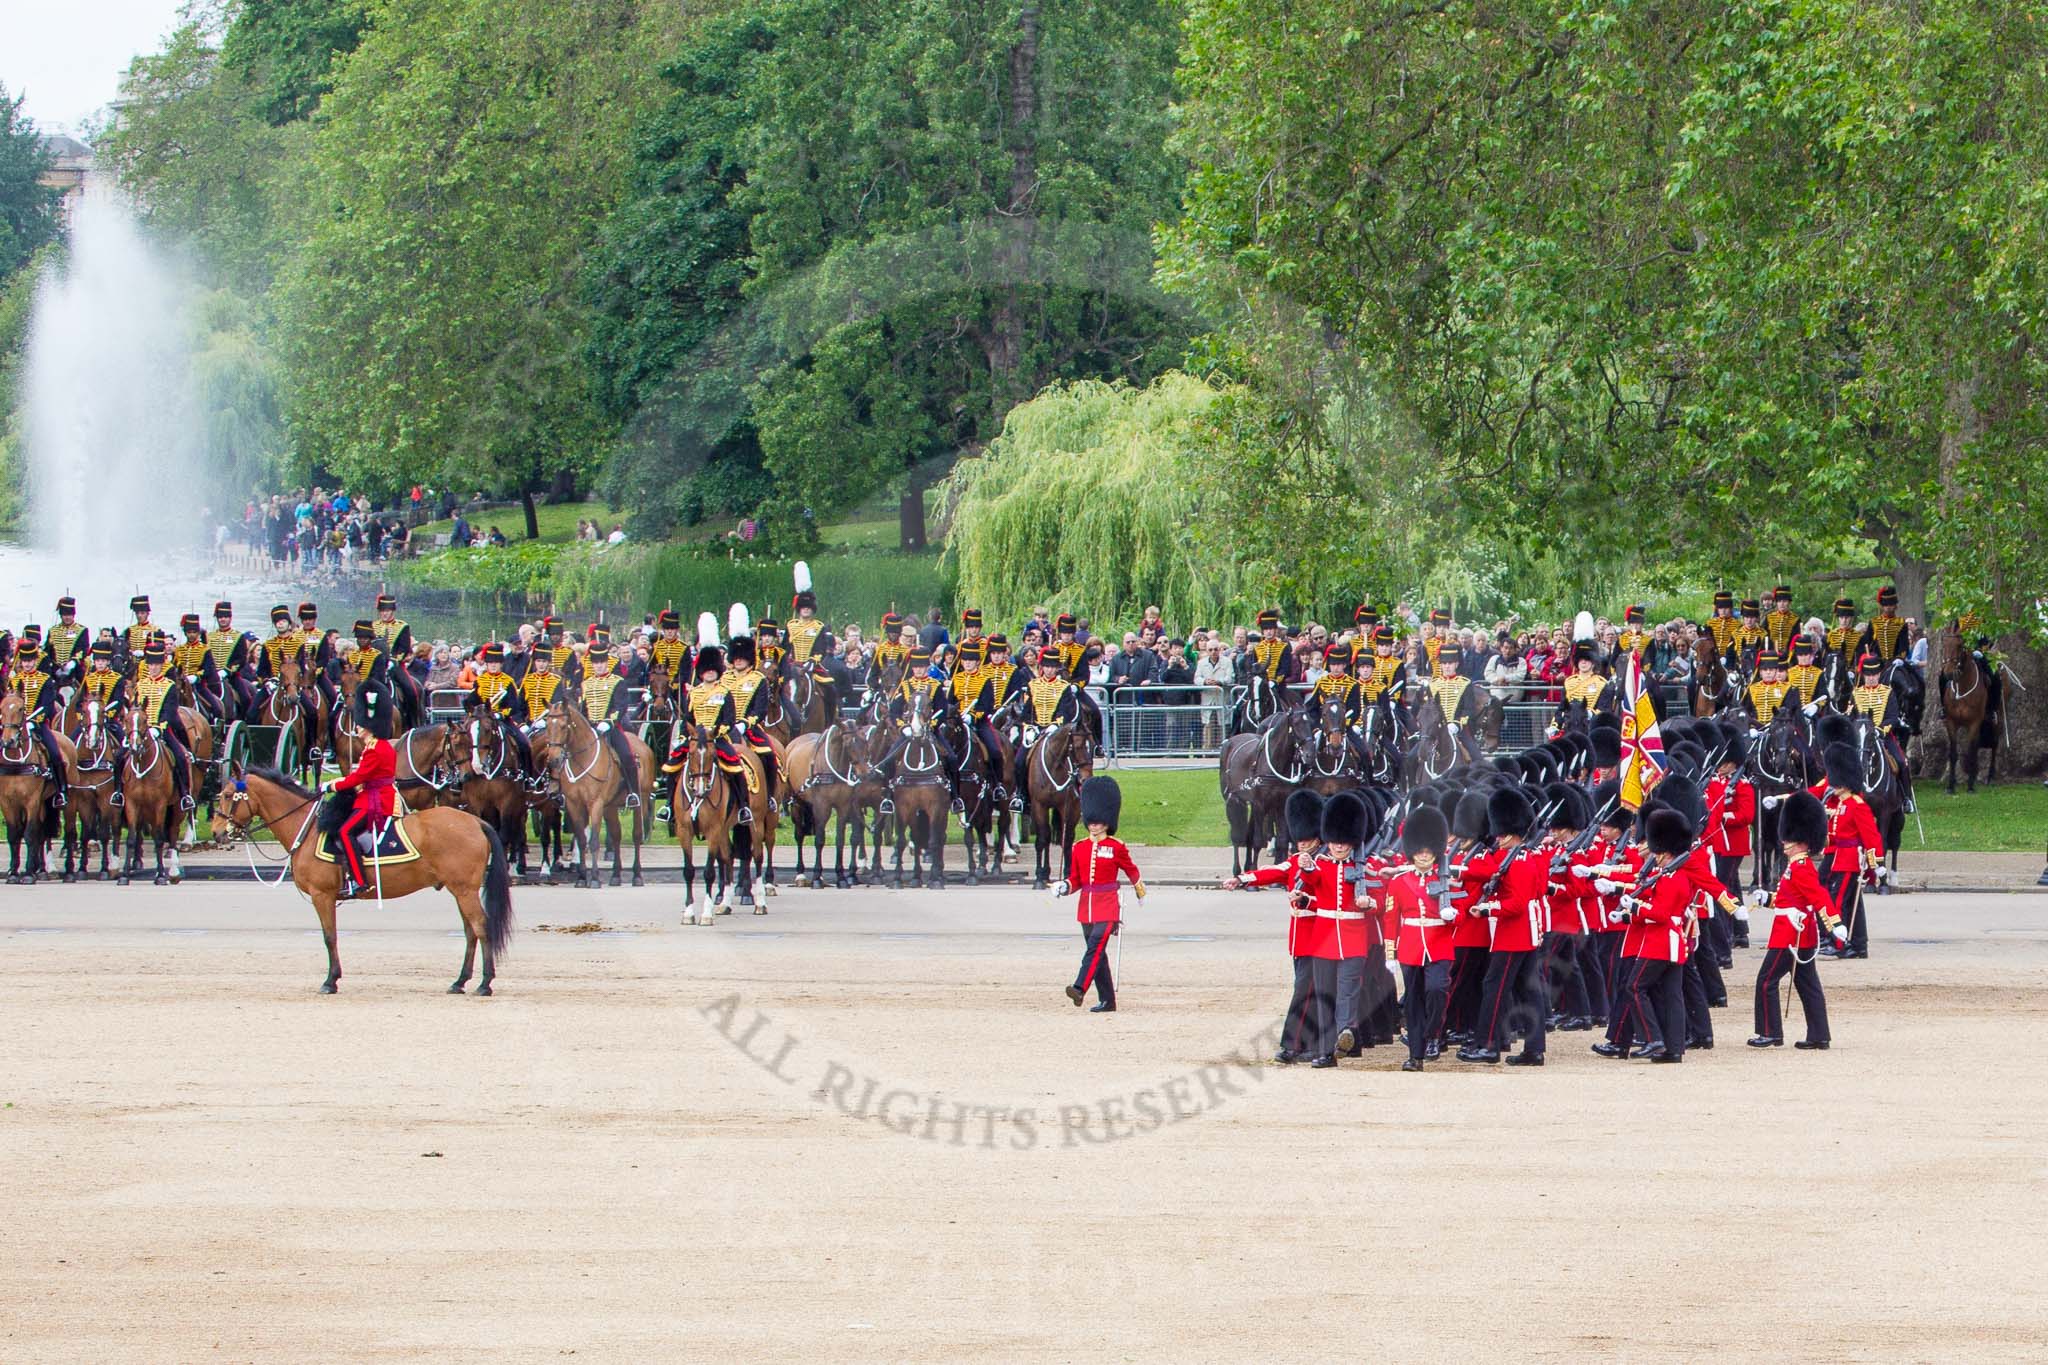 The Colonel's Review 2012: The March Past - The guards are changing their formation, turning left and forming long double rows of guardsmen again..
Horse Guards Parade, Westminster,
London SW1,

United Kingdom,
on 09 June 2012 at 11:47, image #356